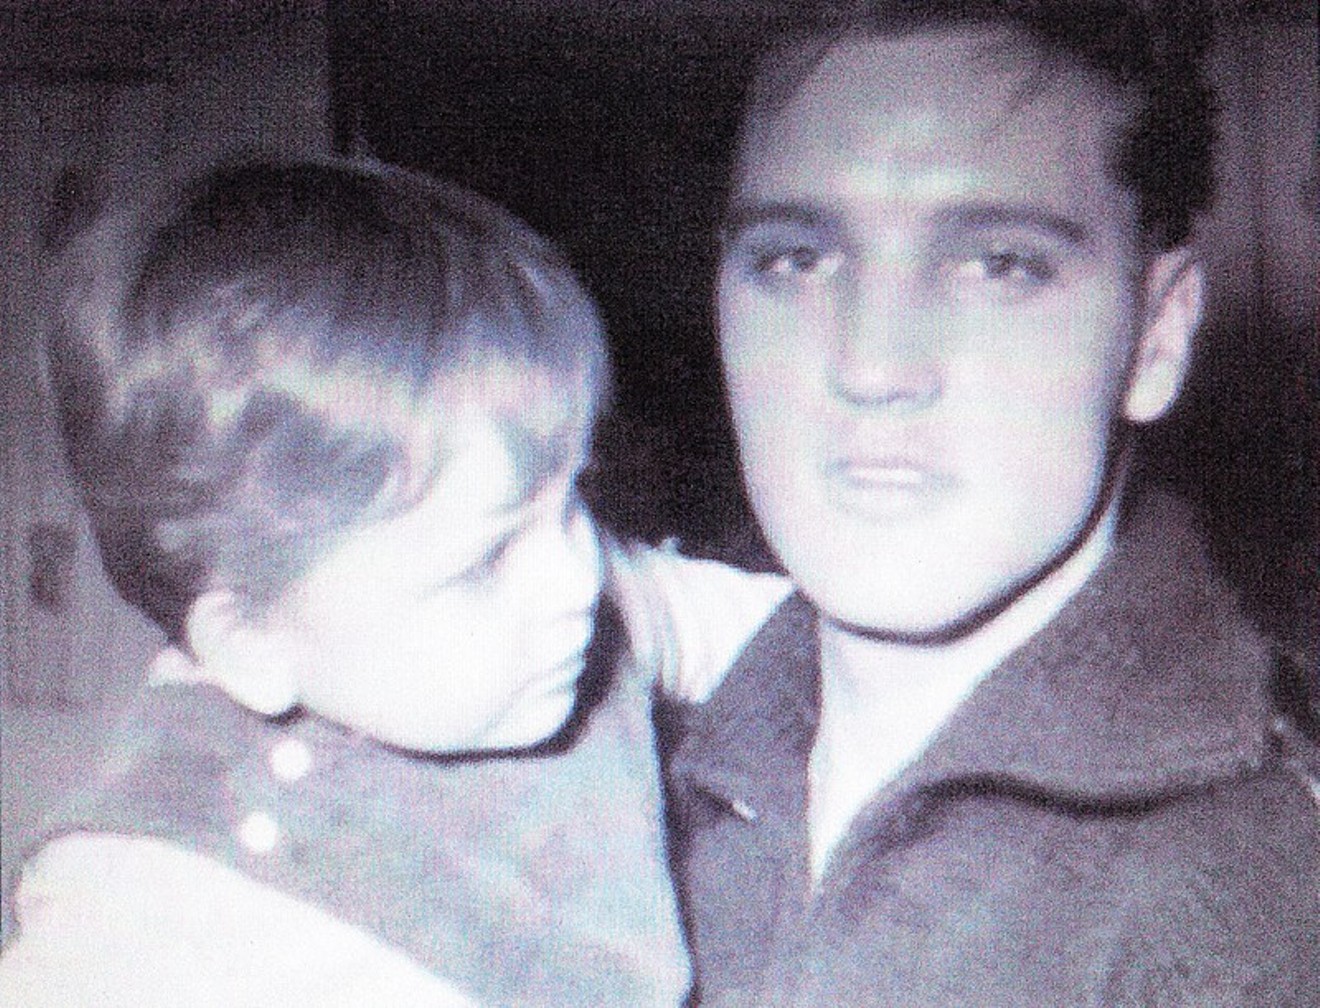 In an undated photo, Elvis Presley holds a boy that John Smith claims is Smith himself.